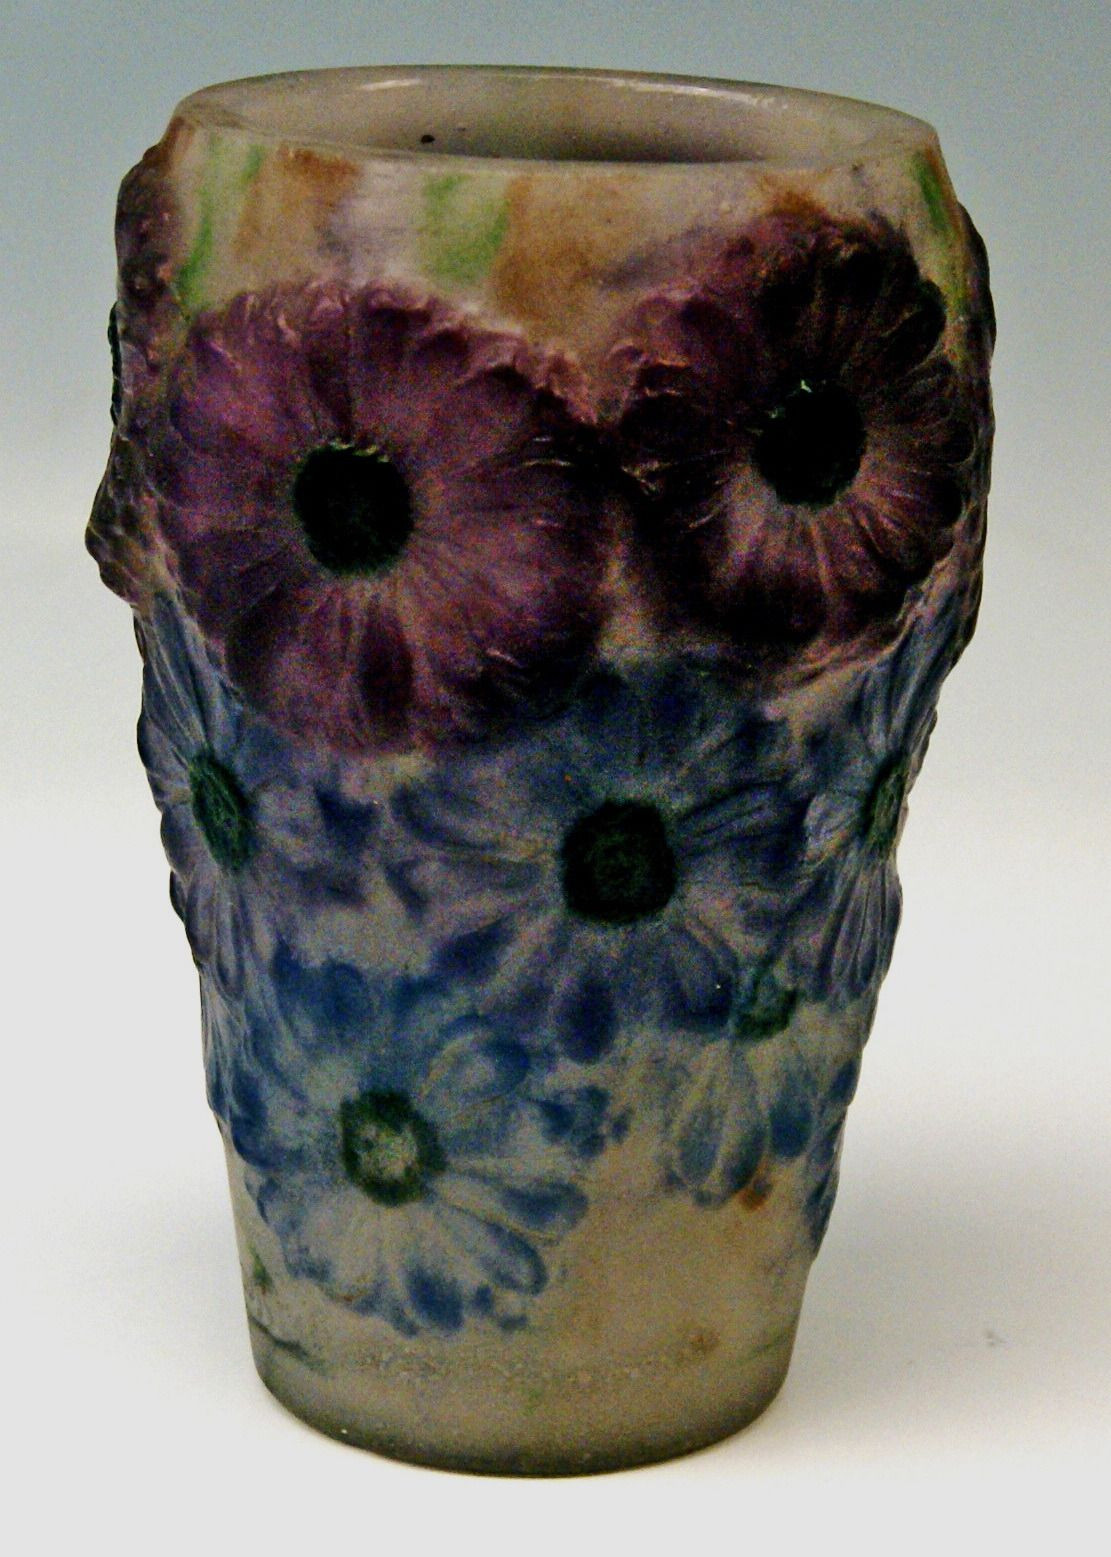 17 Cute French Art Deco Vase 2024 free download french art deco vase of art deco vase with marigolds by gabriel argy rousseau france circa with regard to art deco vase with marigolds by gabriel argy rousseau france circa 1920 image 2